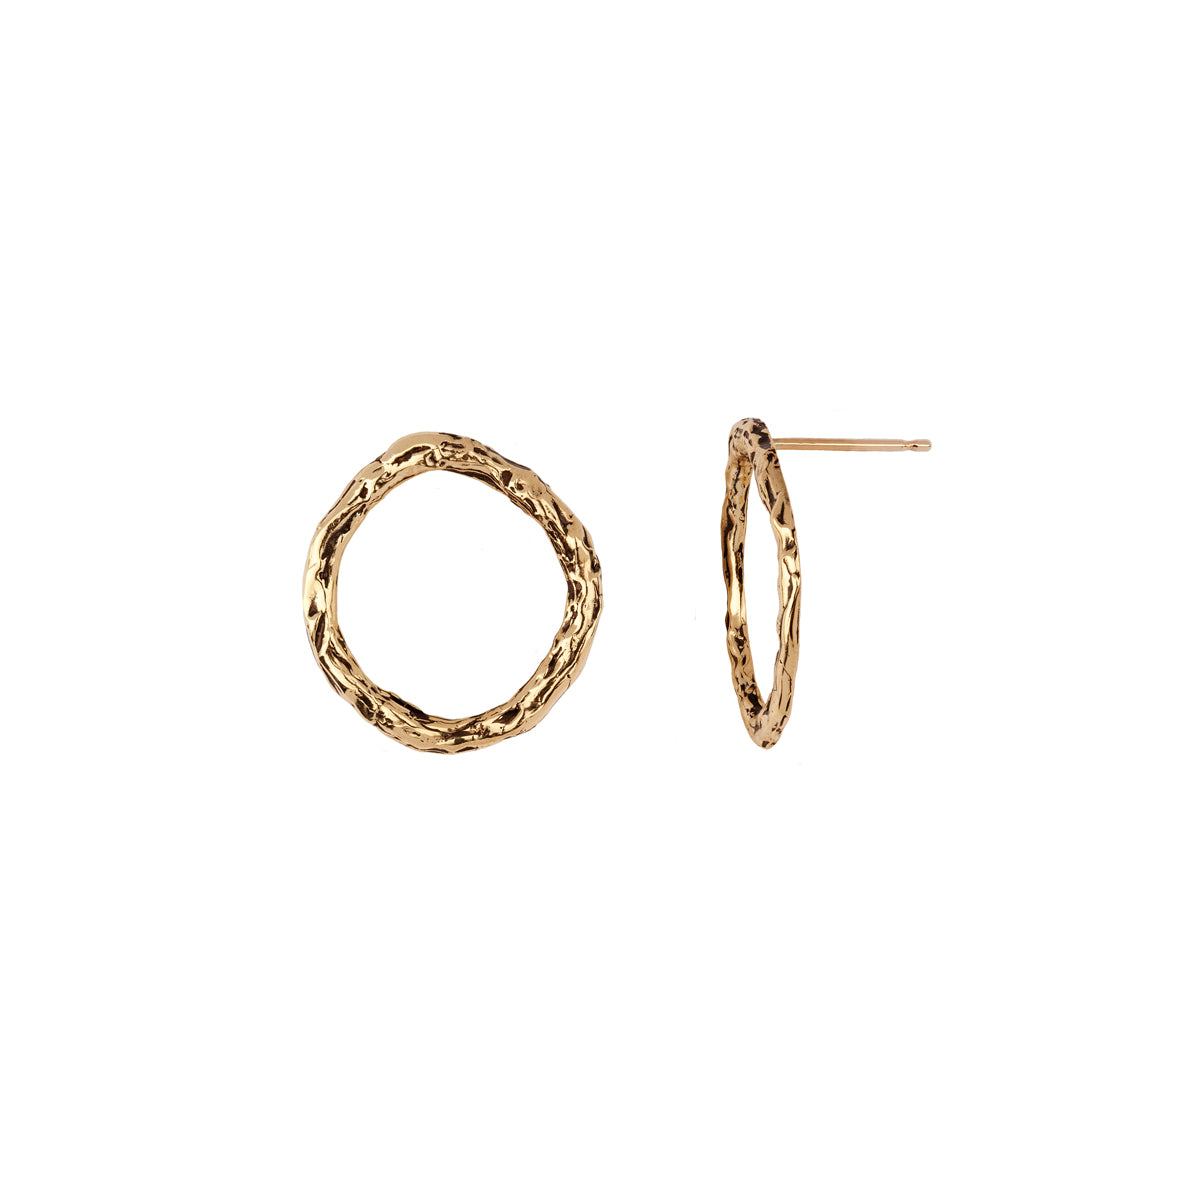 A set of small 14k gold stud earrings with an open circle design.